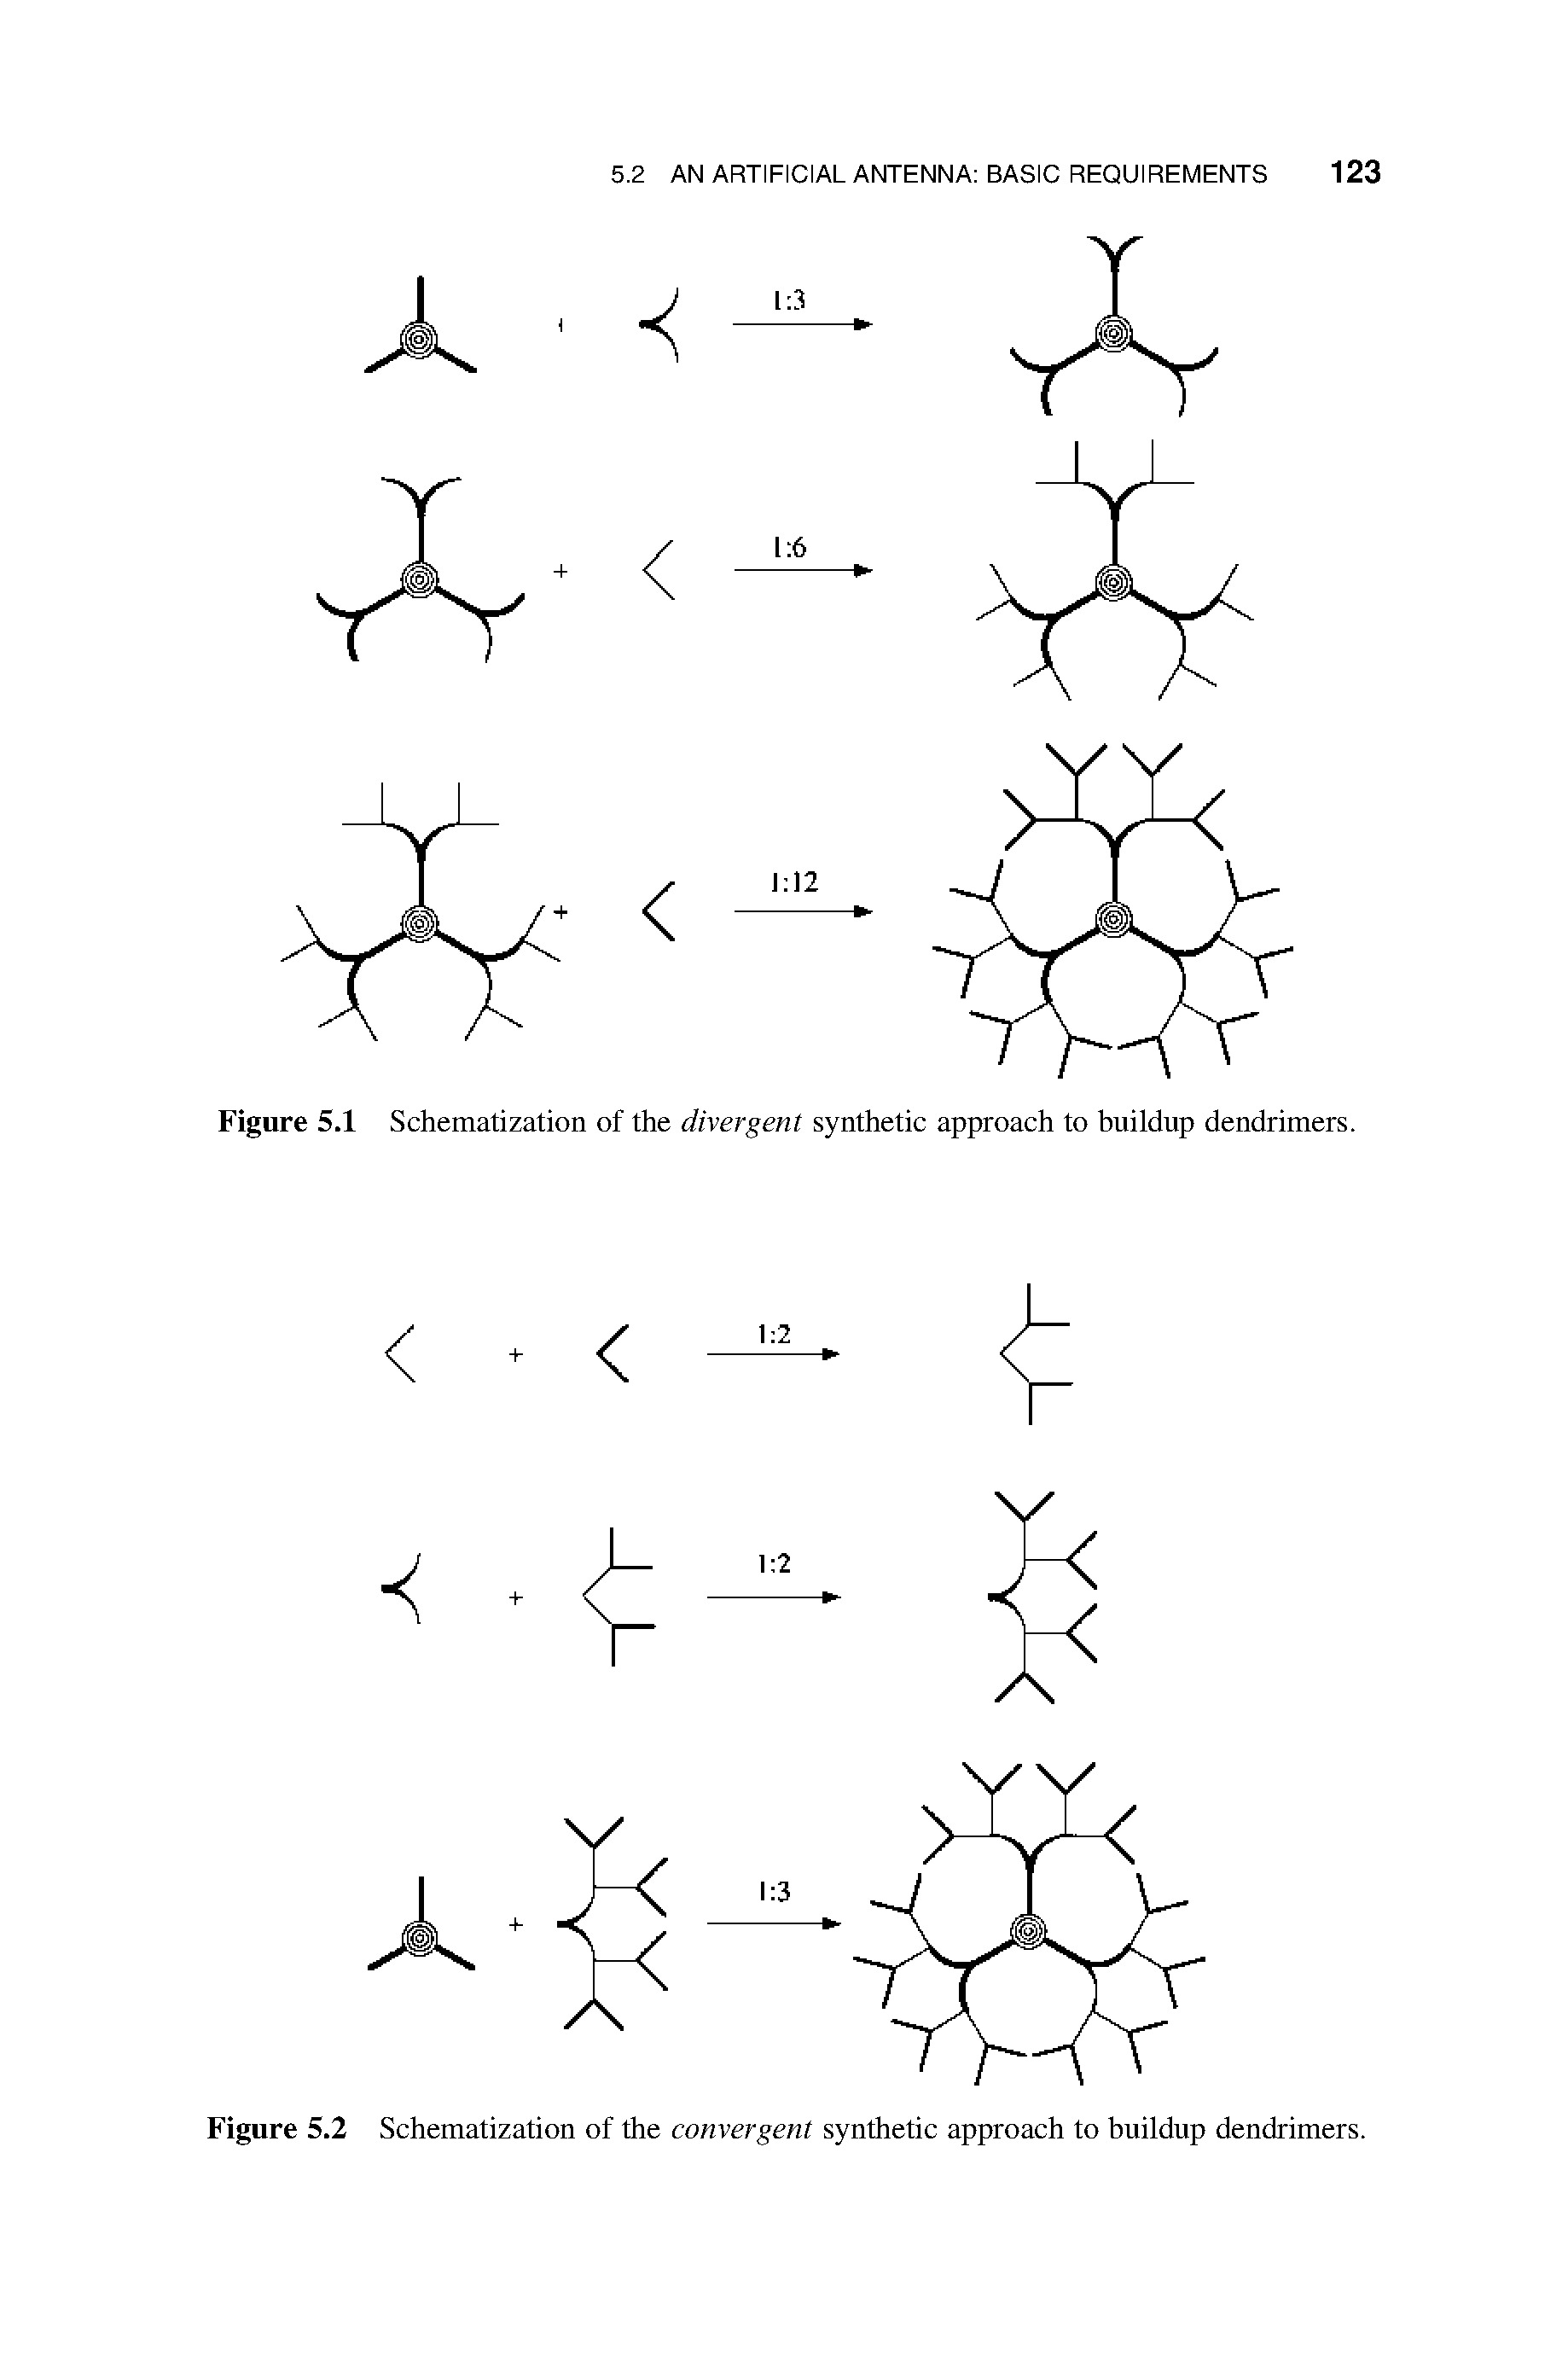 Figure 5.1 Schematization of the divergent synthetic approach to buildup dendrimers.